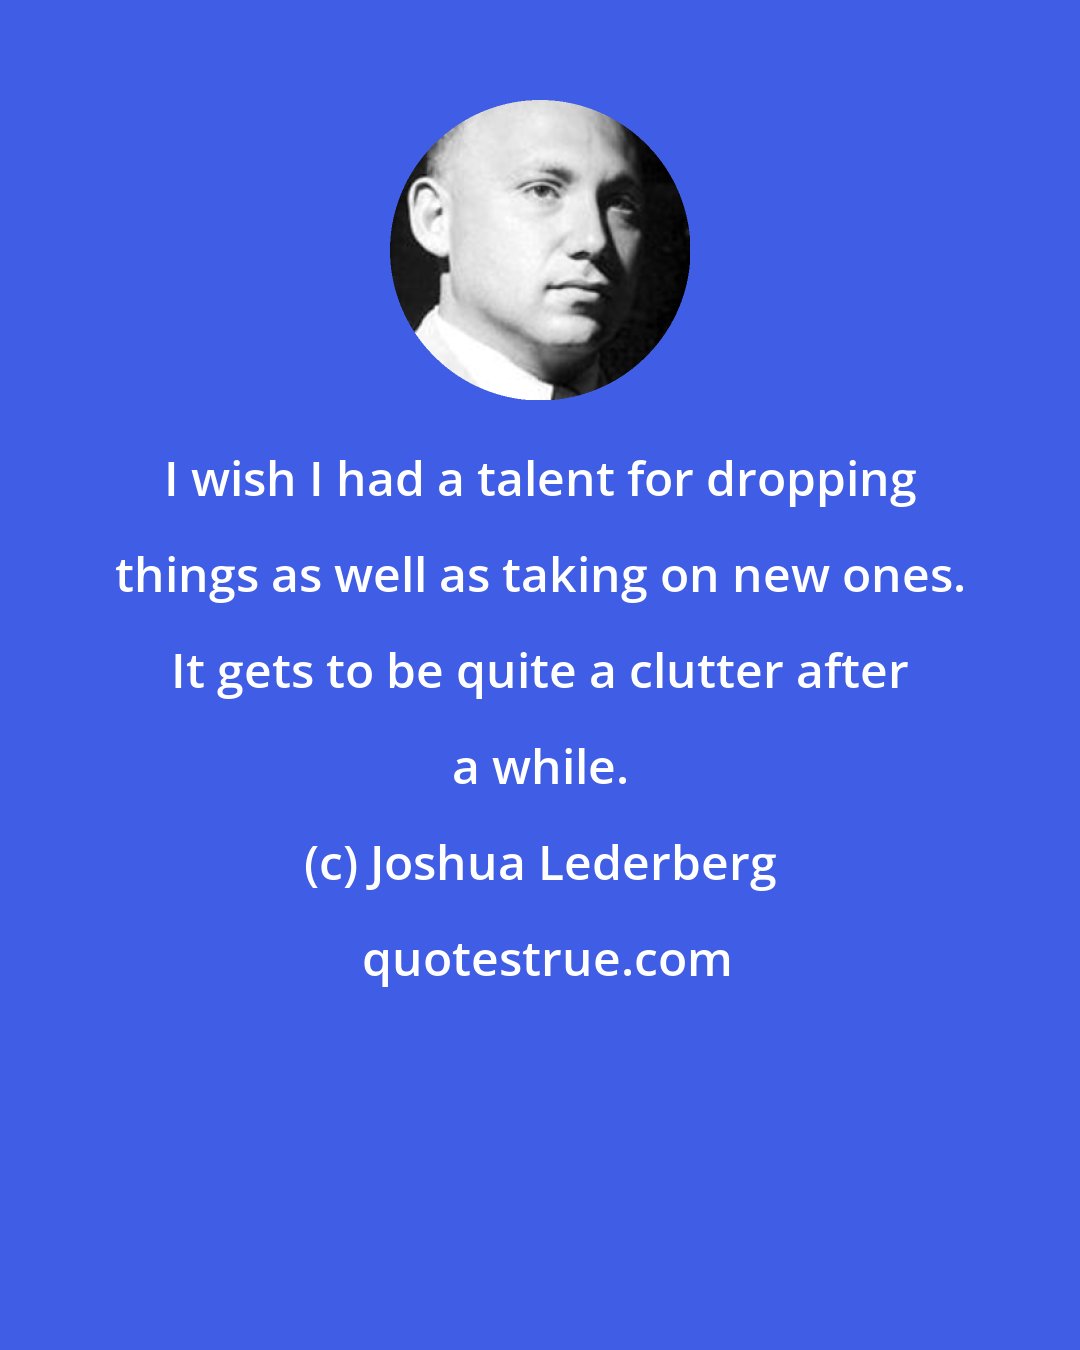 Joshua Lederberg: I wish I had a talent for dropping things as well as taking on new ones. It gets to be quite a clutter after a while.